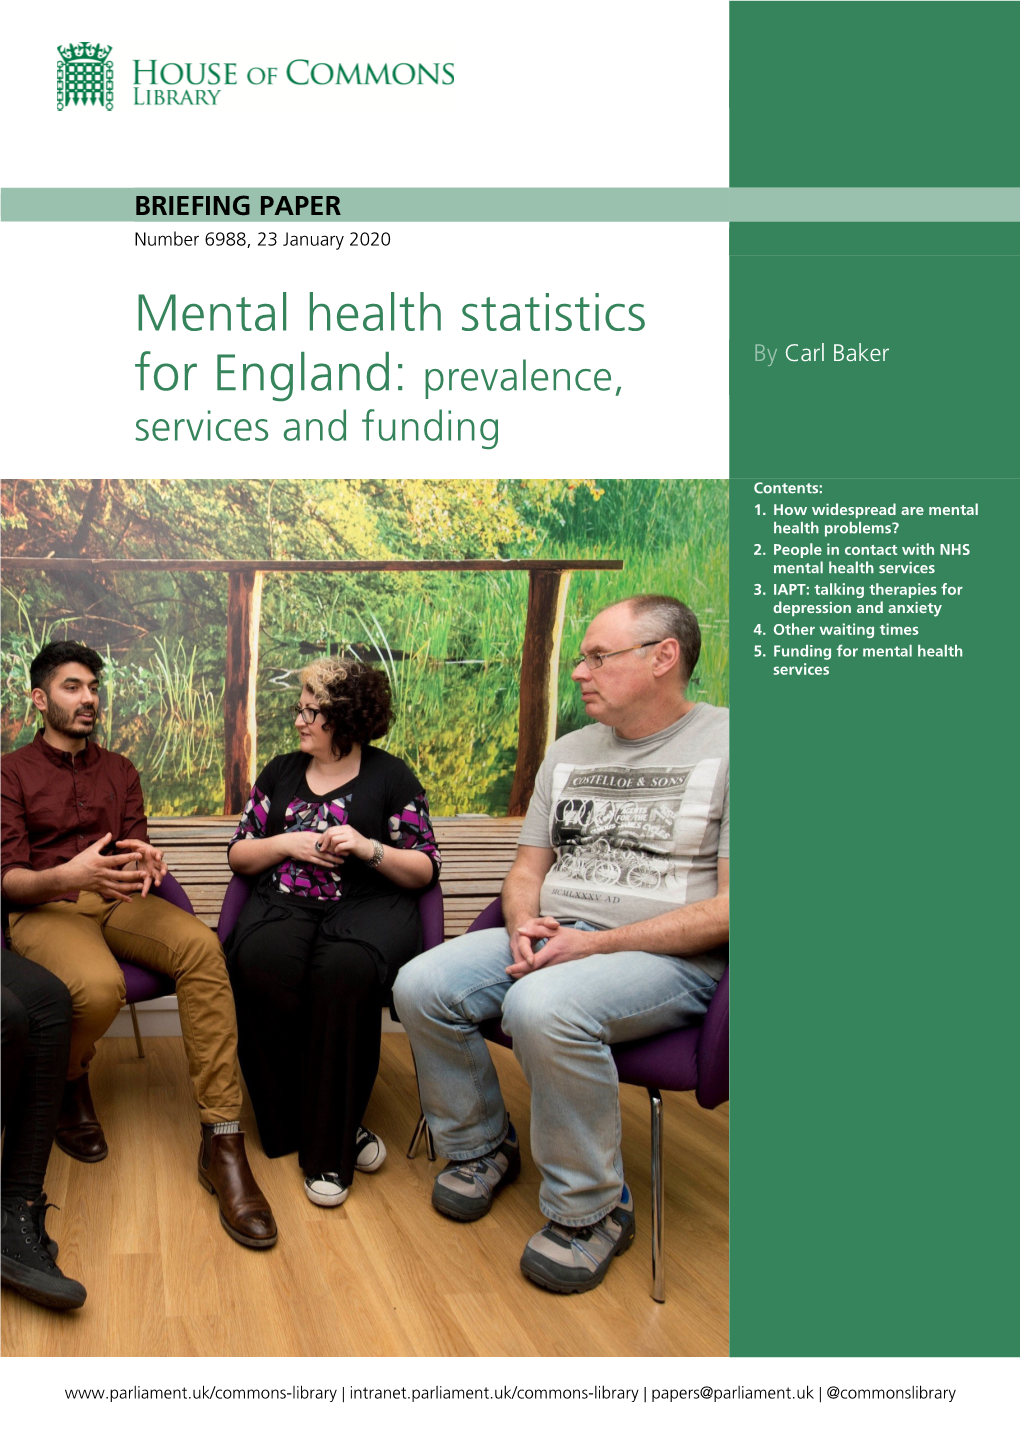 Mental Health Statistics for England: Prevalence, Services and Funding